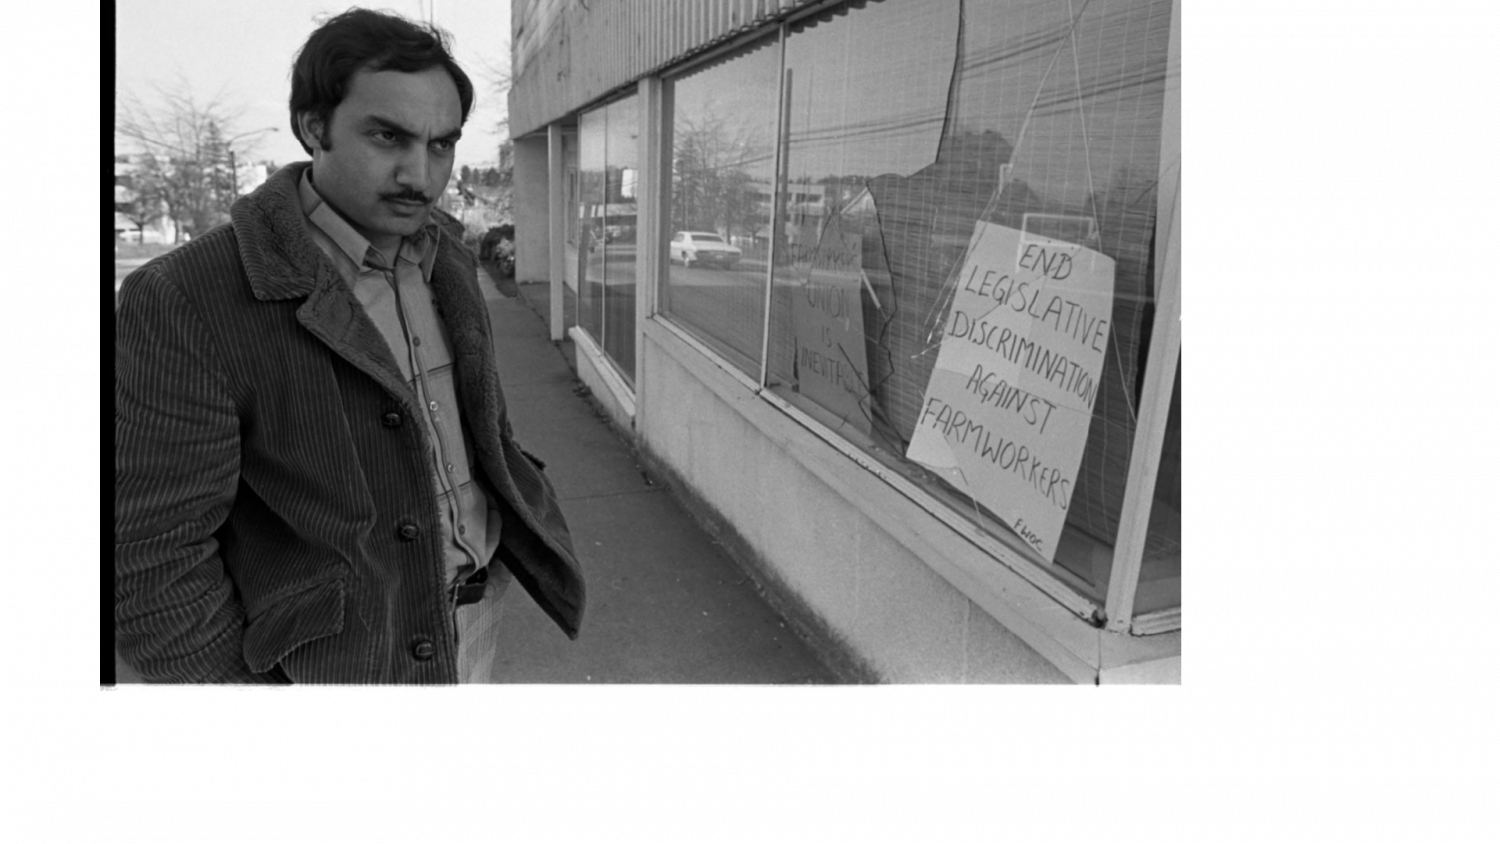 Farm Workers Organizing Committee President Raj Chouhan stands in front of a vandalized FWOC office window.